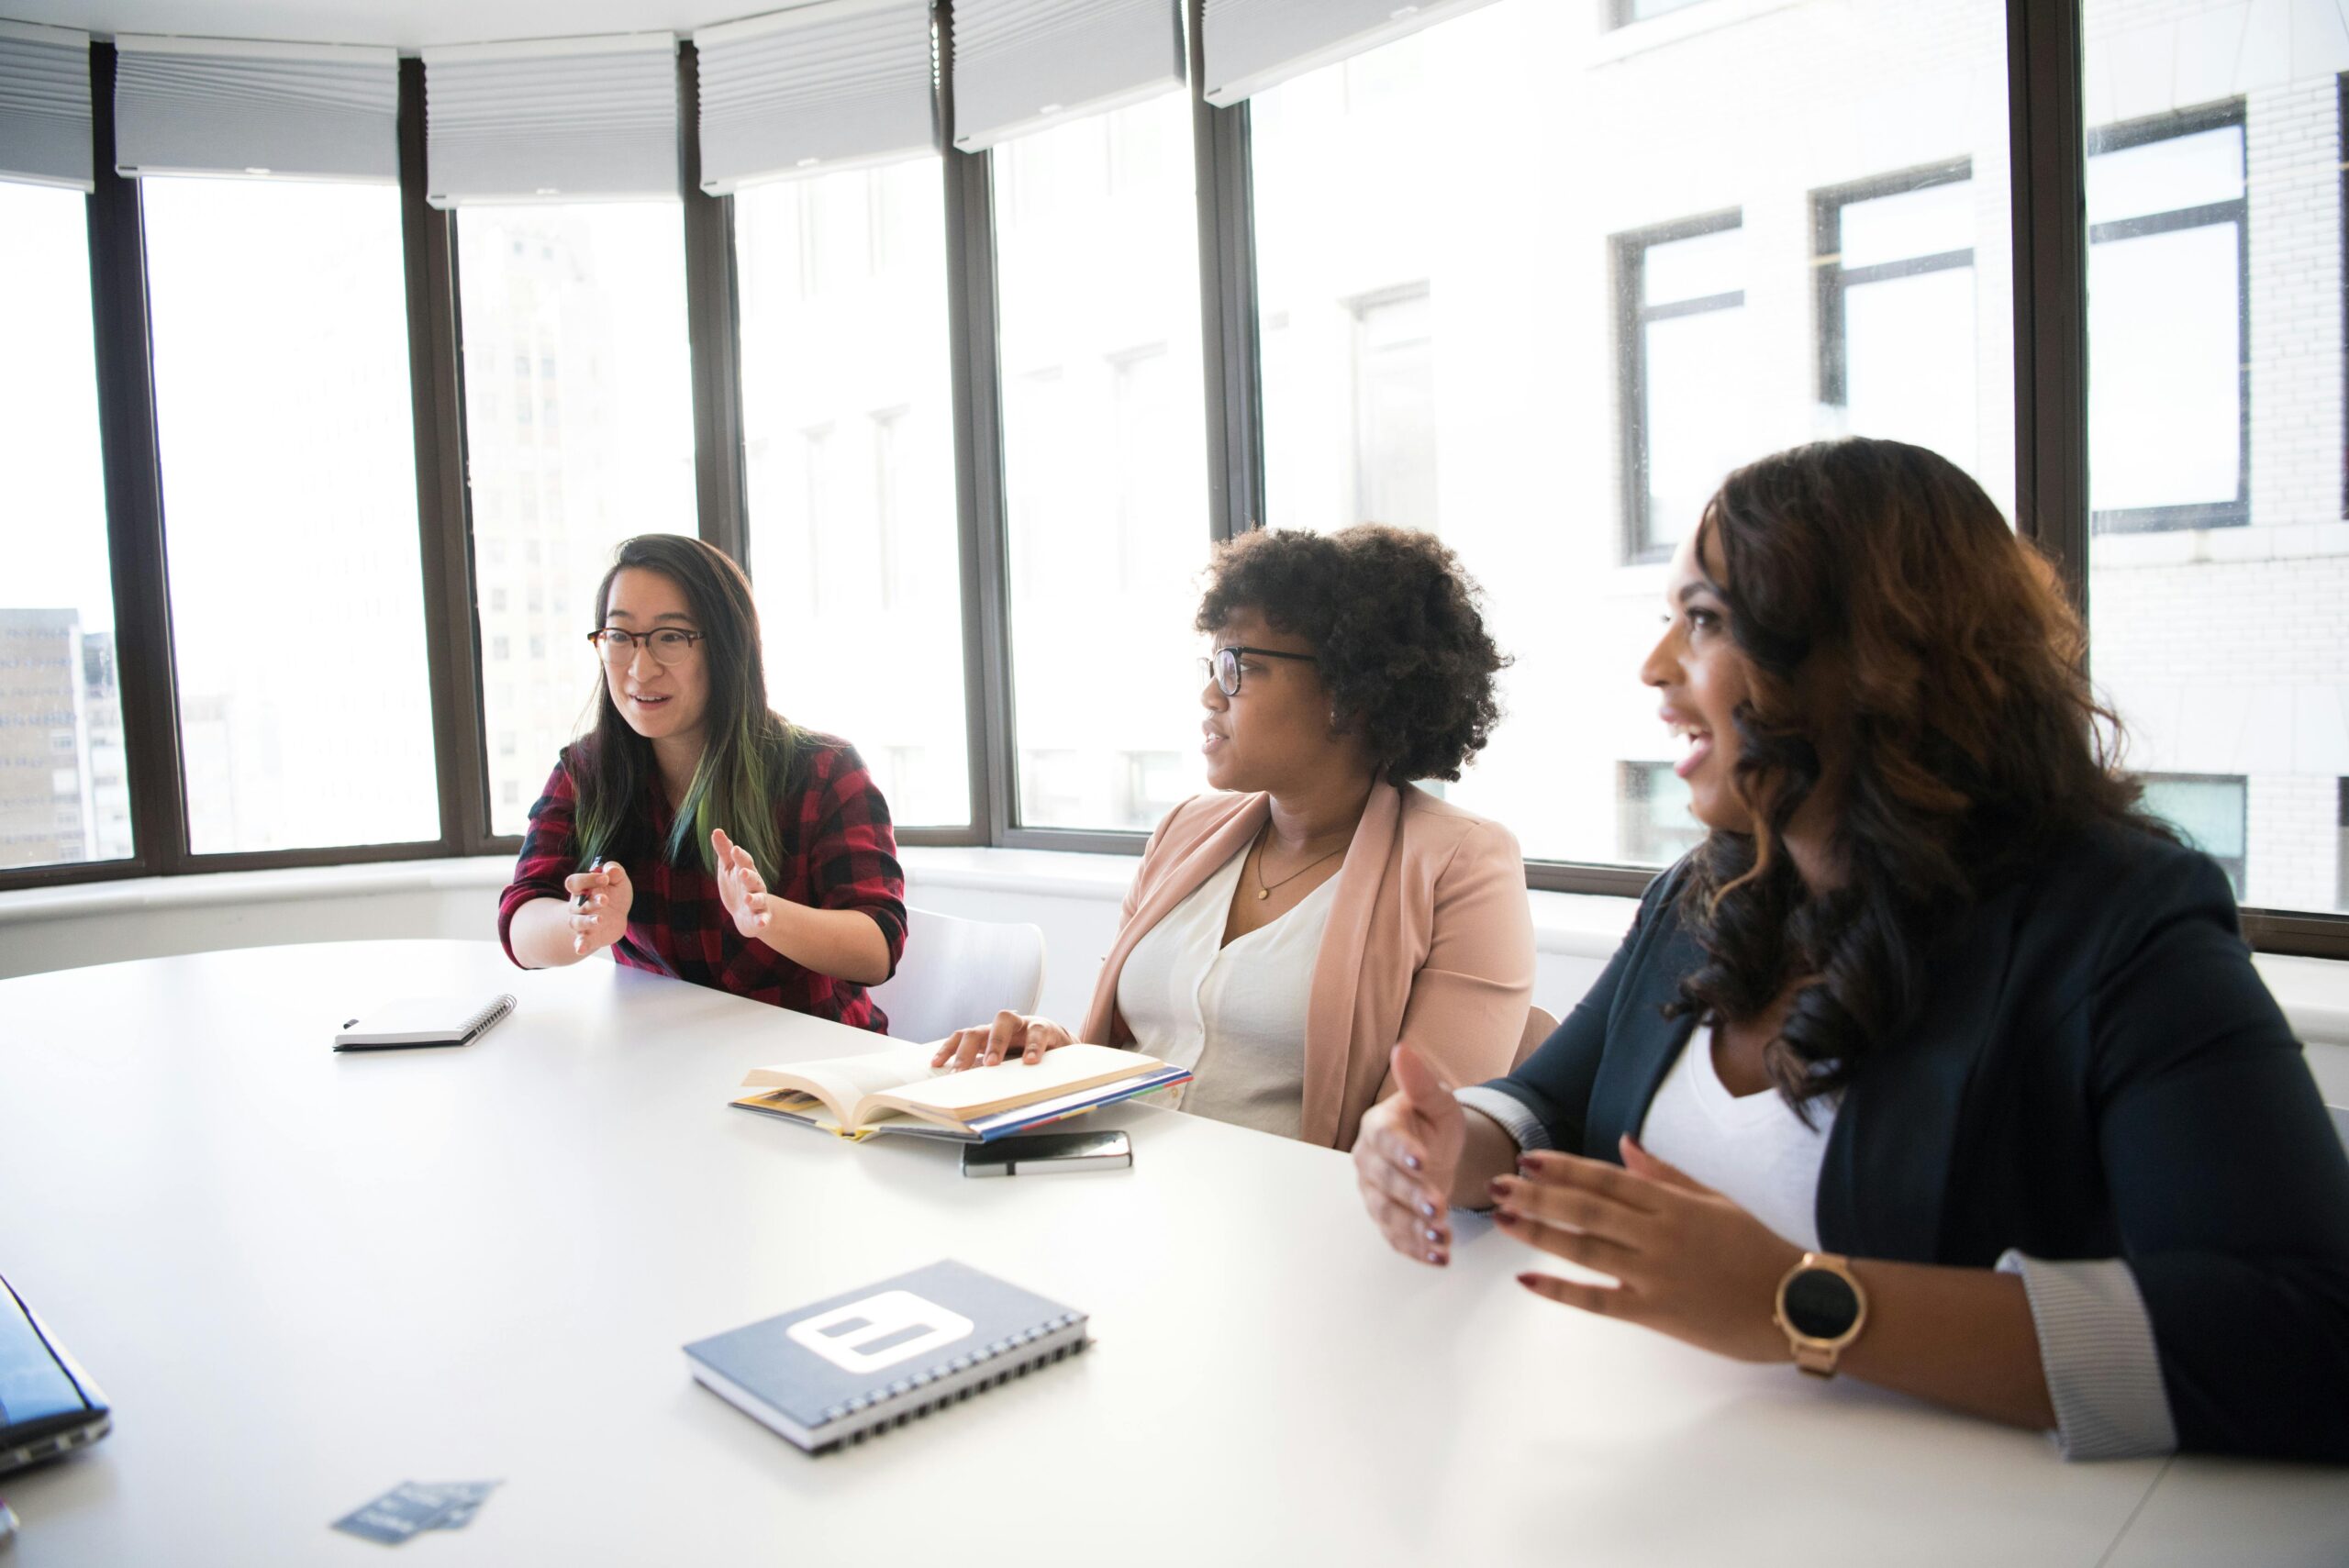 A group of women participating in a paid focus group, earning extra money, while sitting around a conference table.